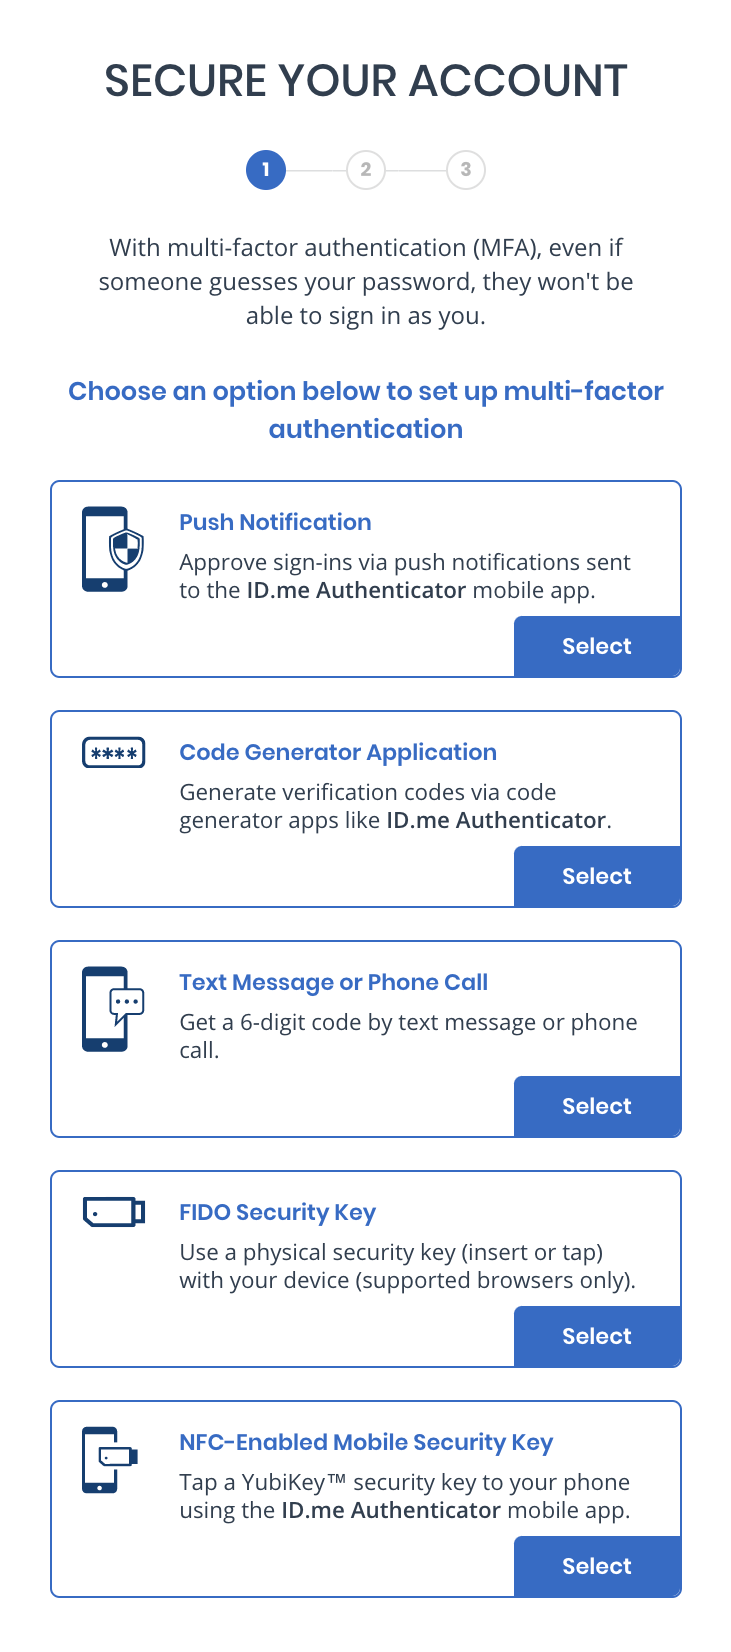 Secure your account by selecting one of the following multi-factor authentication methods: push notification; code generator application; text message or phone call; FIDO security KEY; NFC enabled mobile security key.